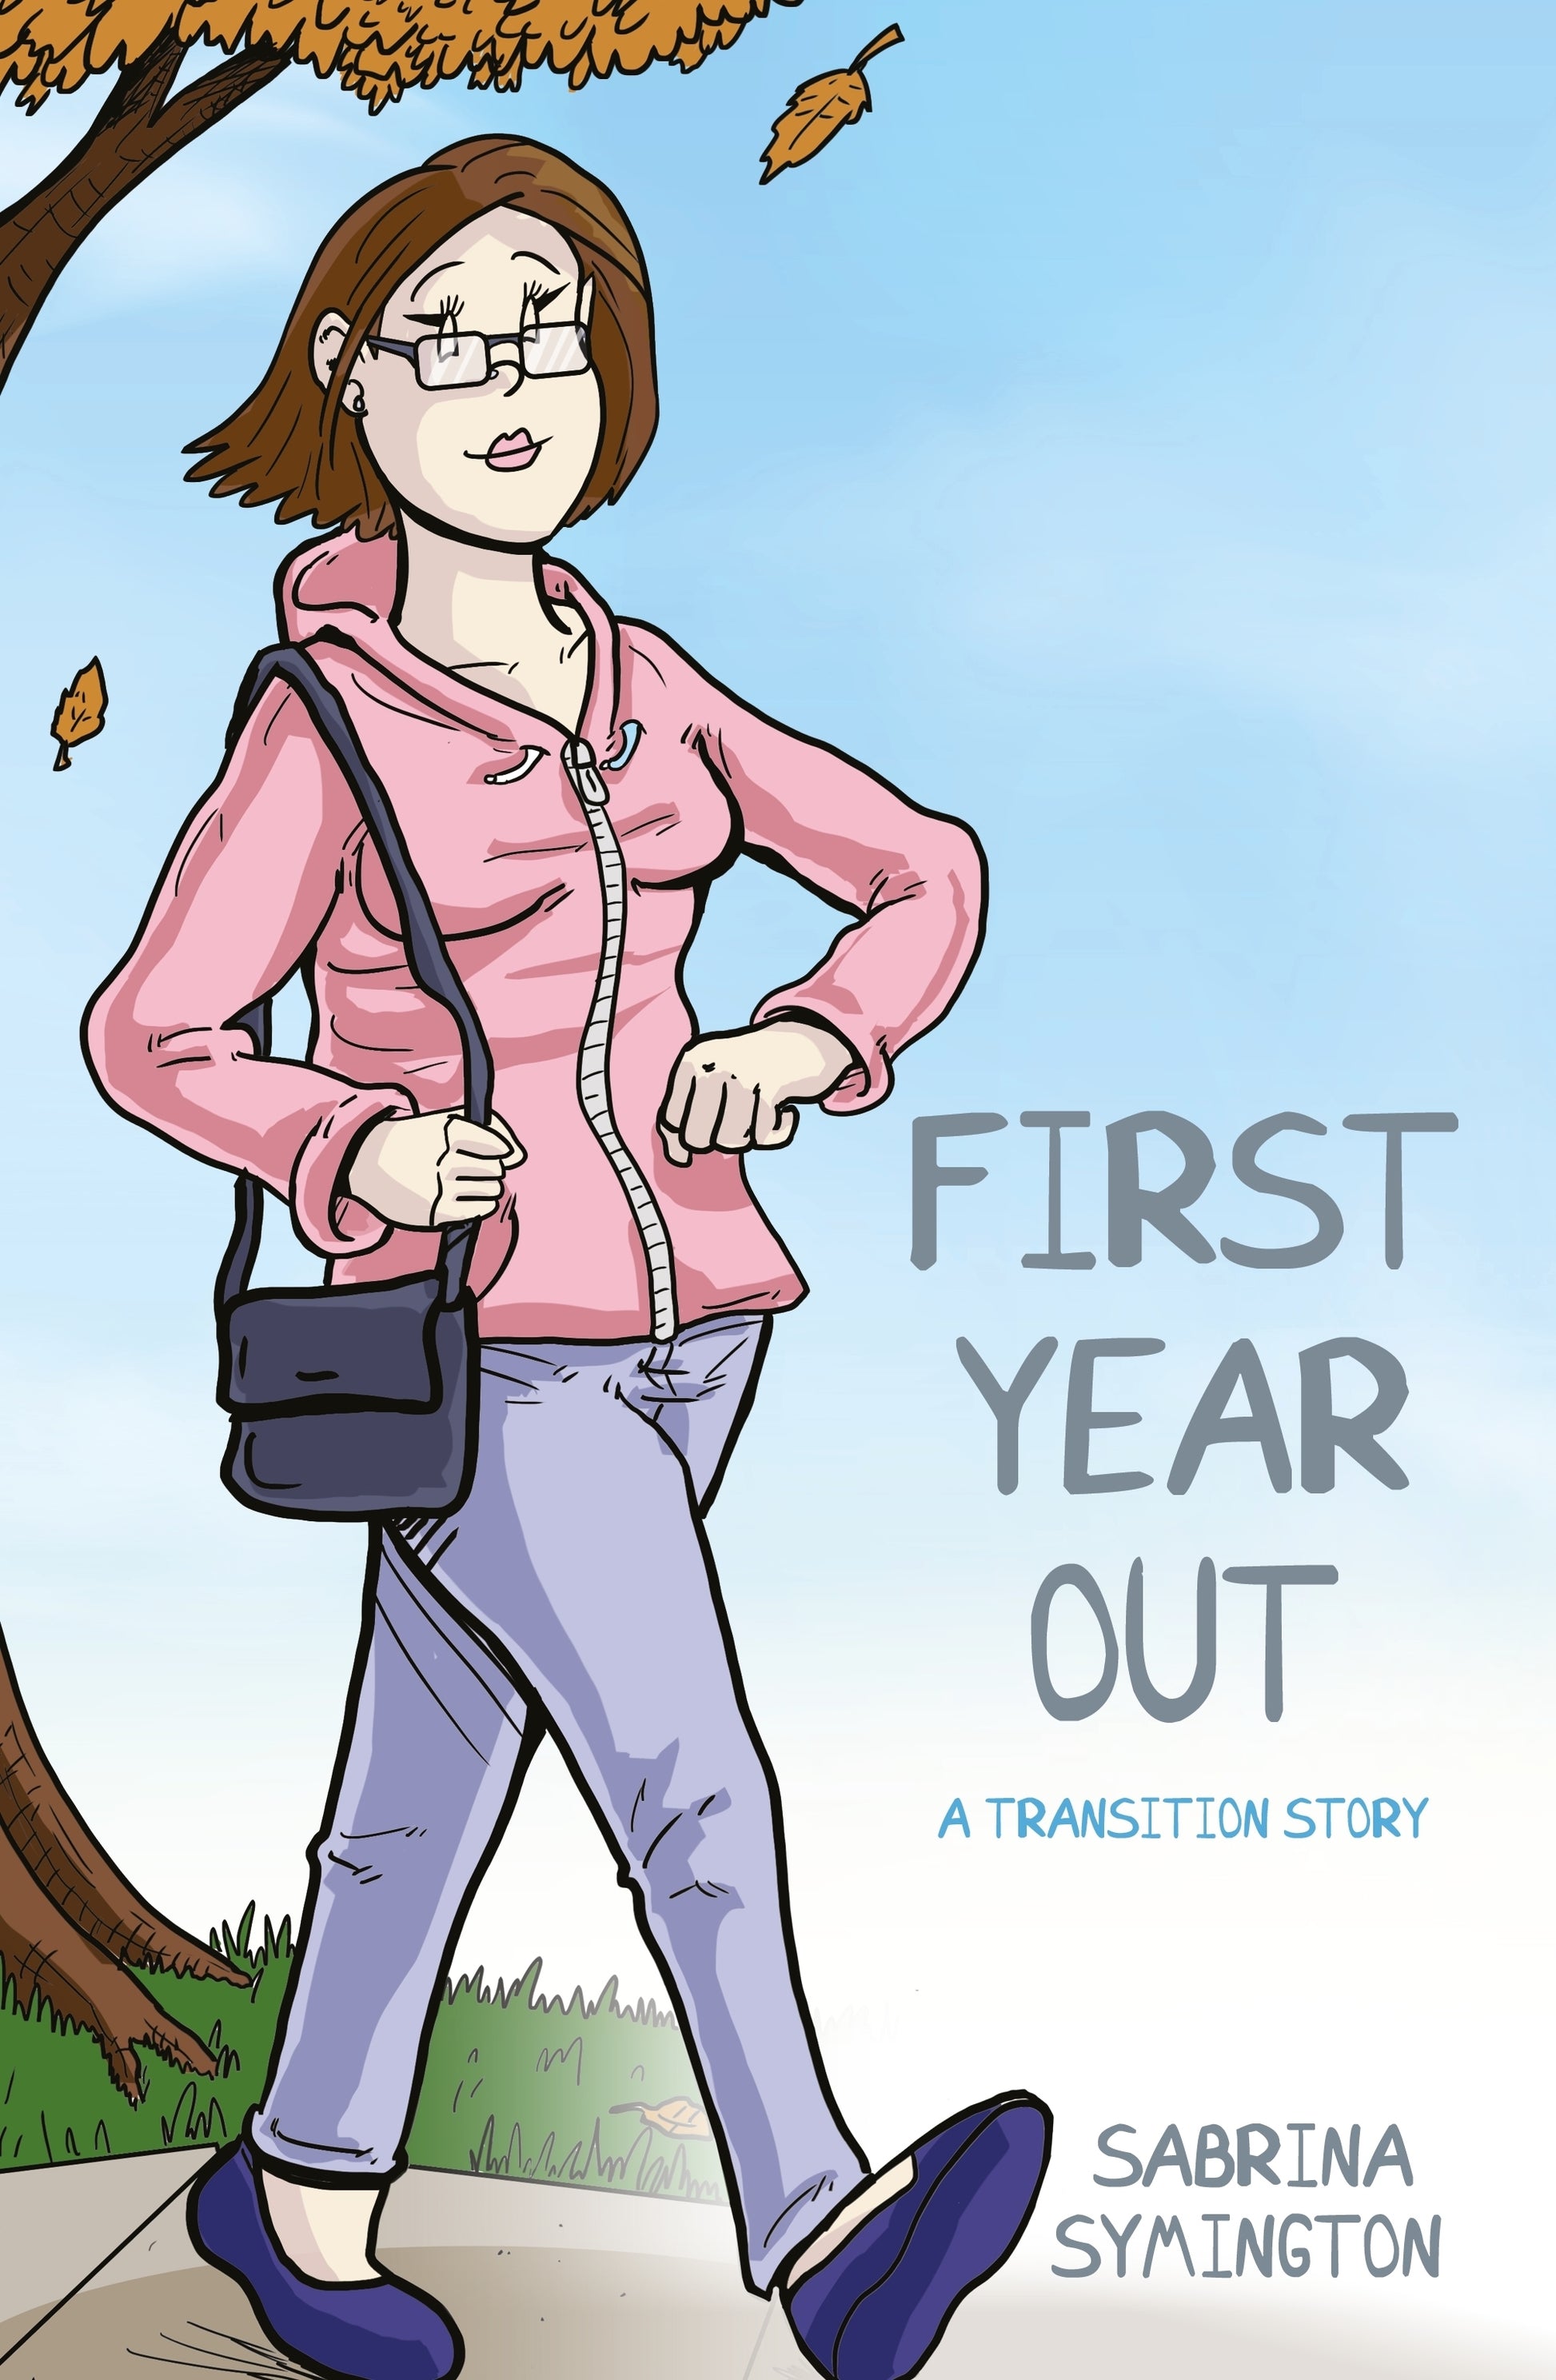 First Year Out by Sabrina Symington